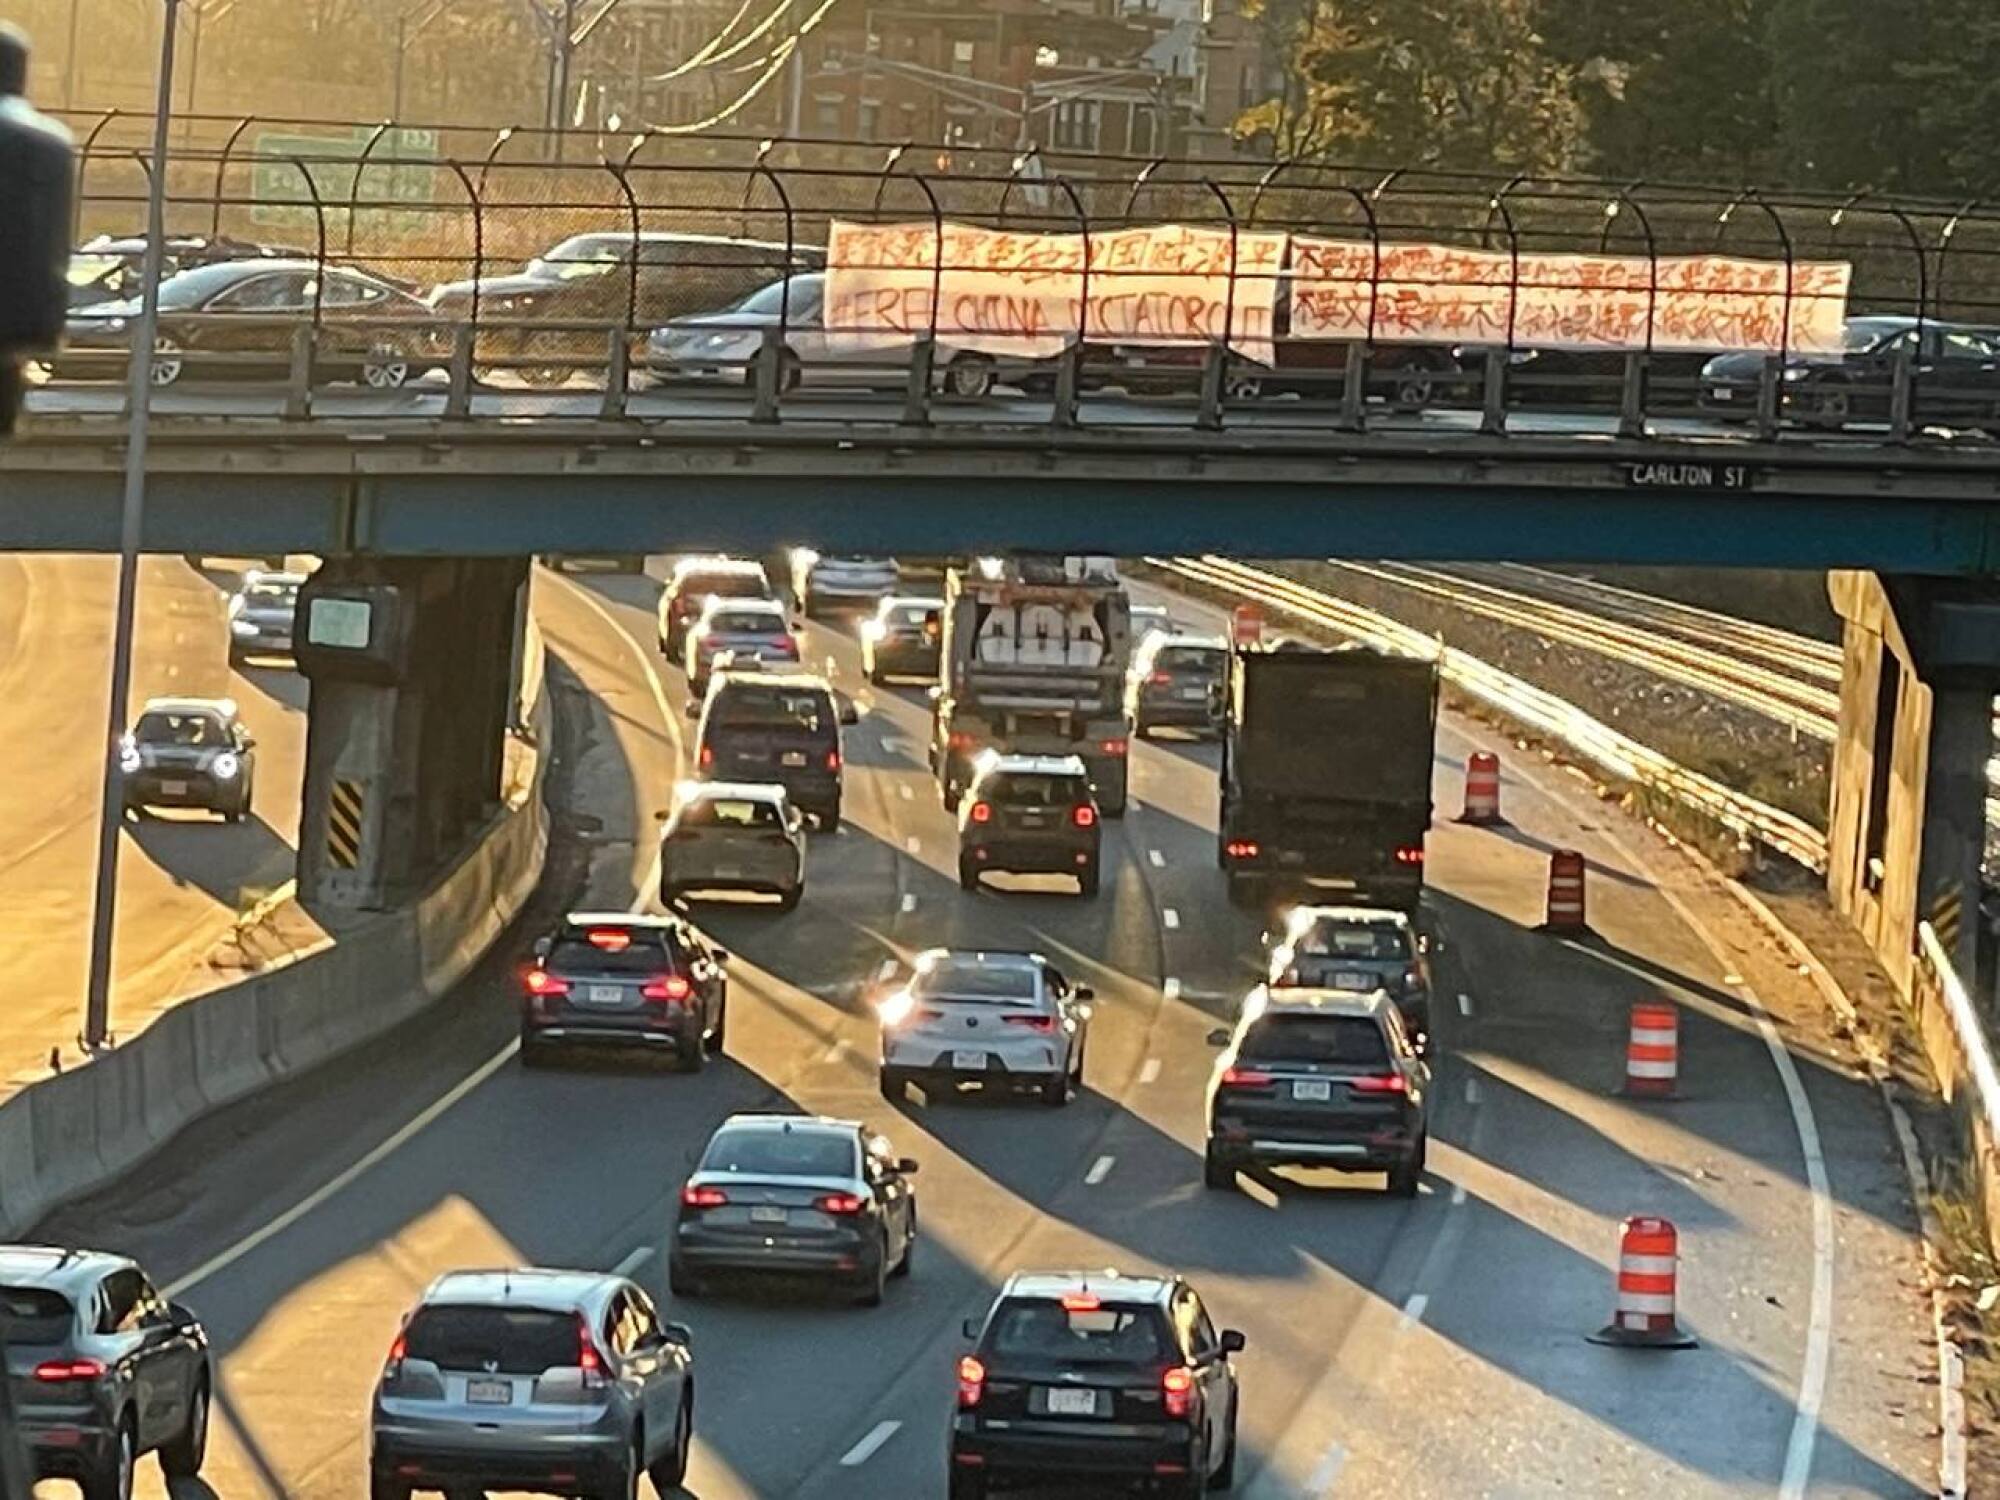 A banner protesting China's government hangs on a highway overpass in Boston